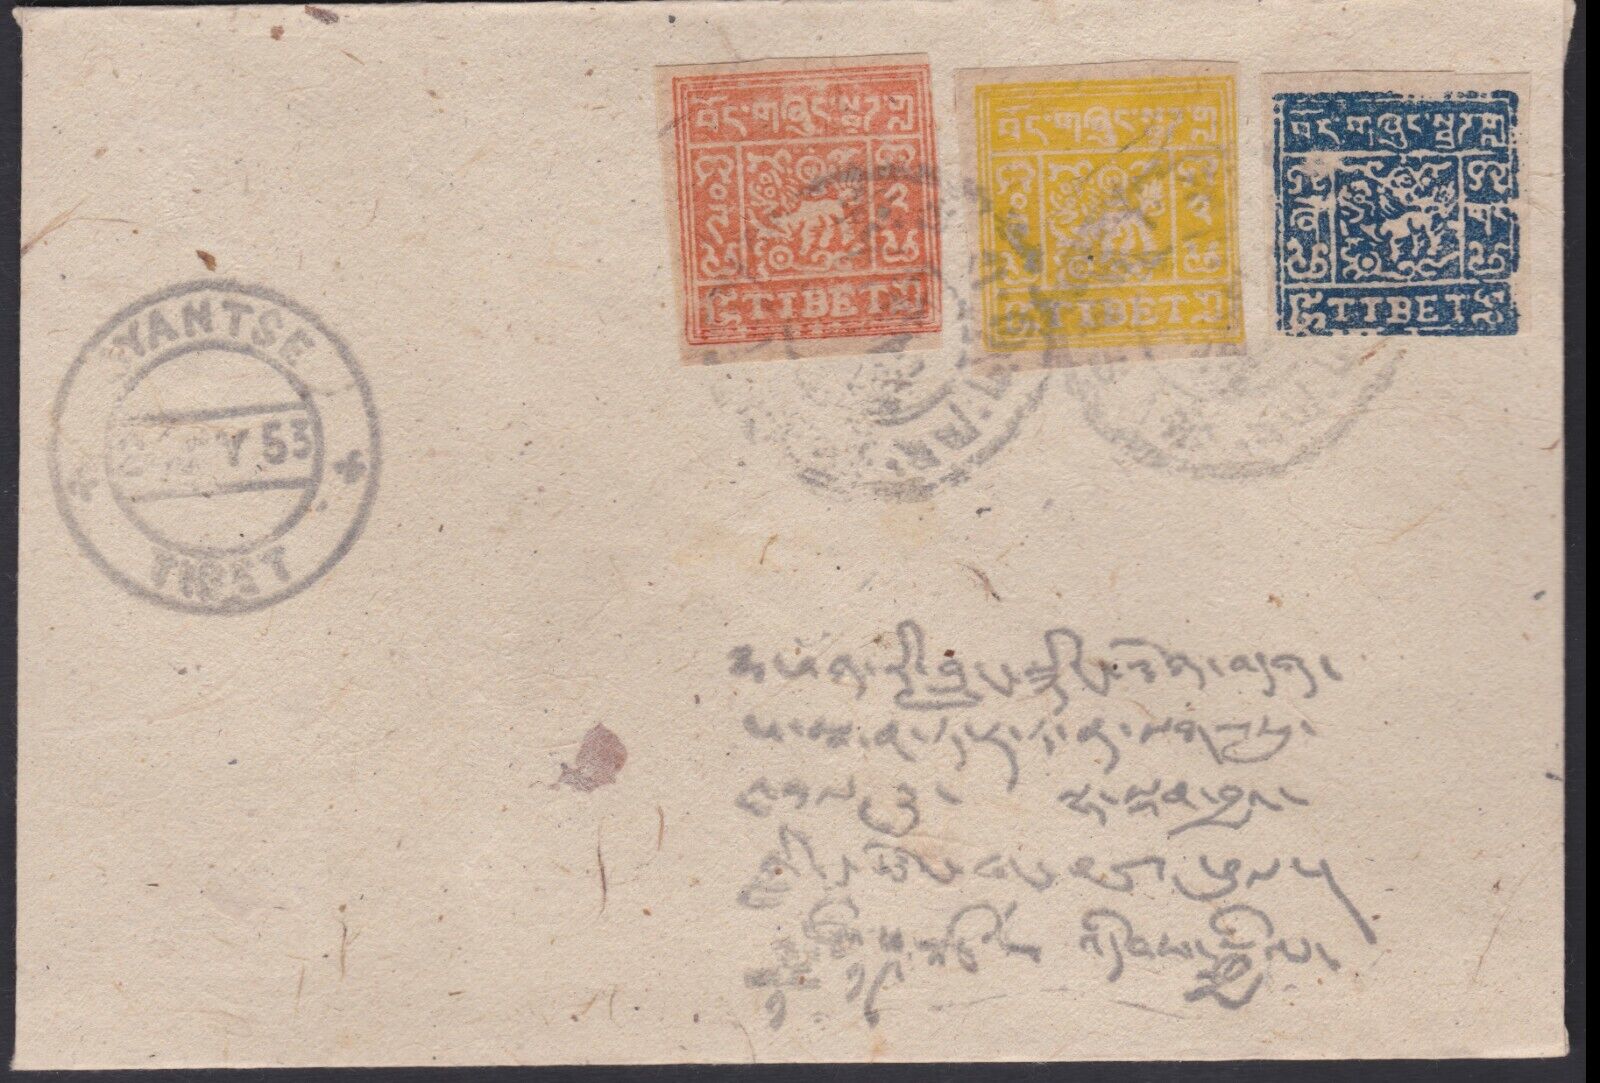 1953 Gyantse Tibet Asia Postal Cover - Likely Reproduction Replica Copy